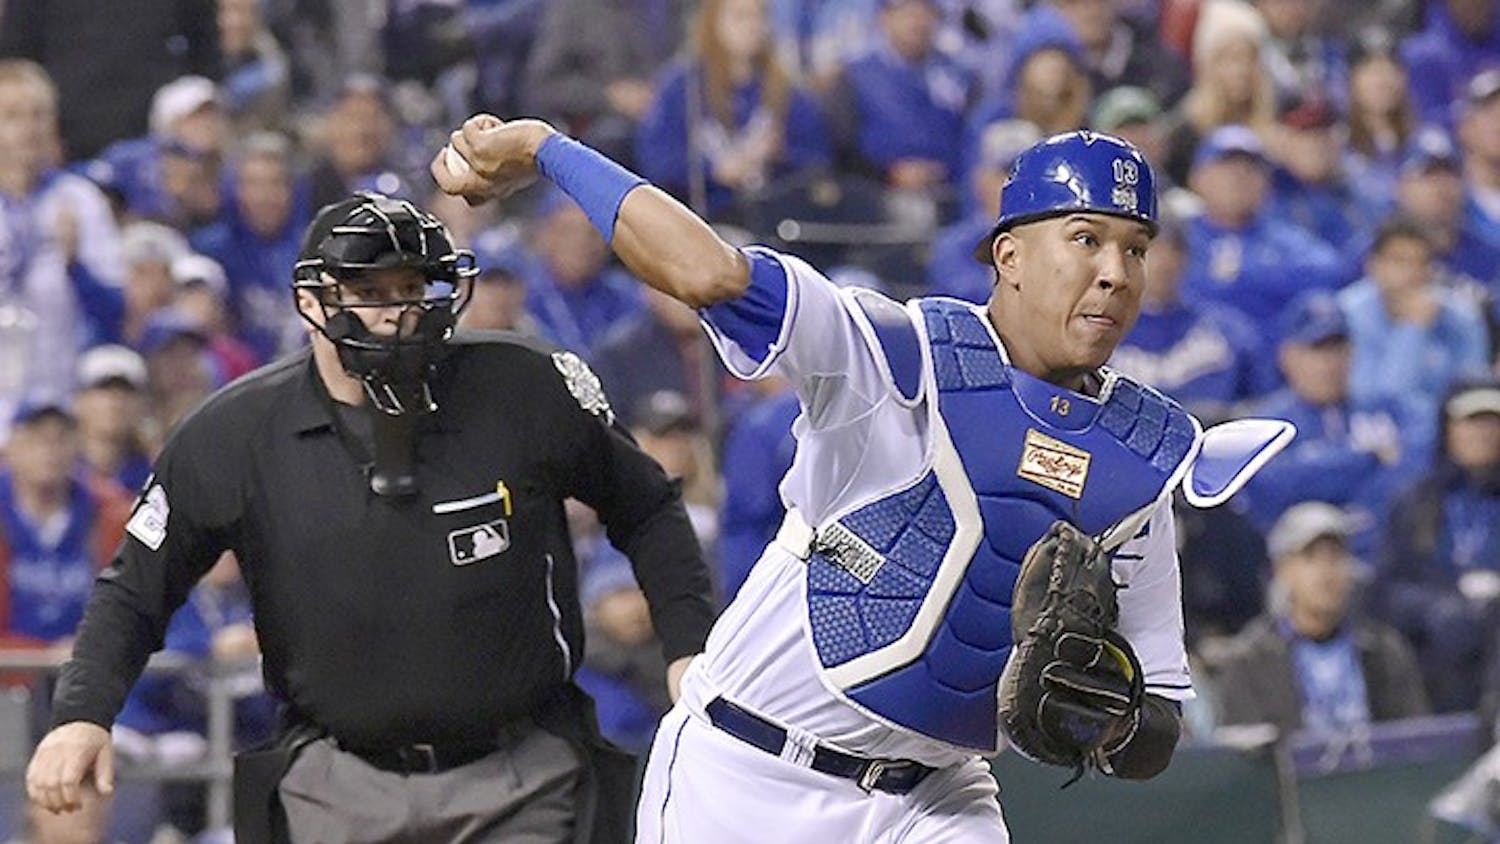 Kansas City Royals catcher Salvador Perez throws to first to retire the New York Mets&apos; Daniel Murphy on a third-strike wild pitch in the 12th inning in Game 1 of the World Series on Tuesday, Oct. 27, 2015, at Kauffman Stadium in Kansas City, Mo. (John Sleezer/Kansas City Star/TNS)